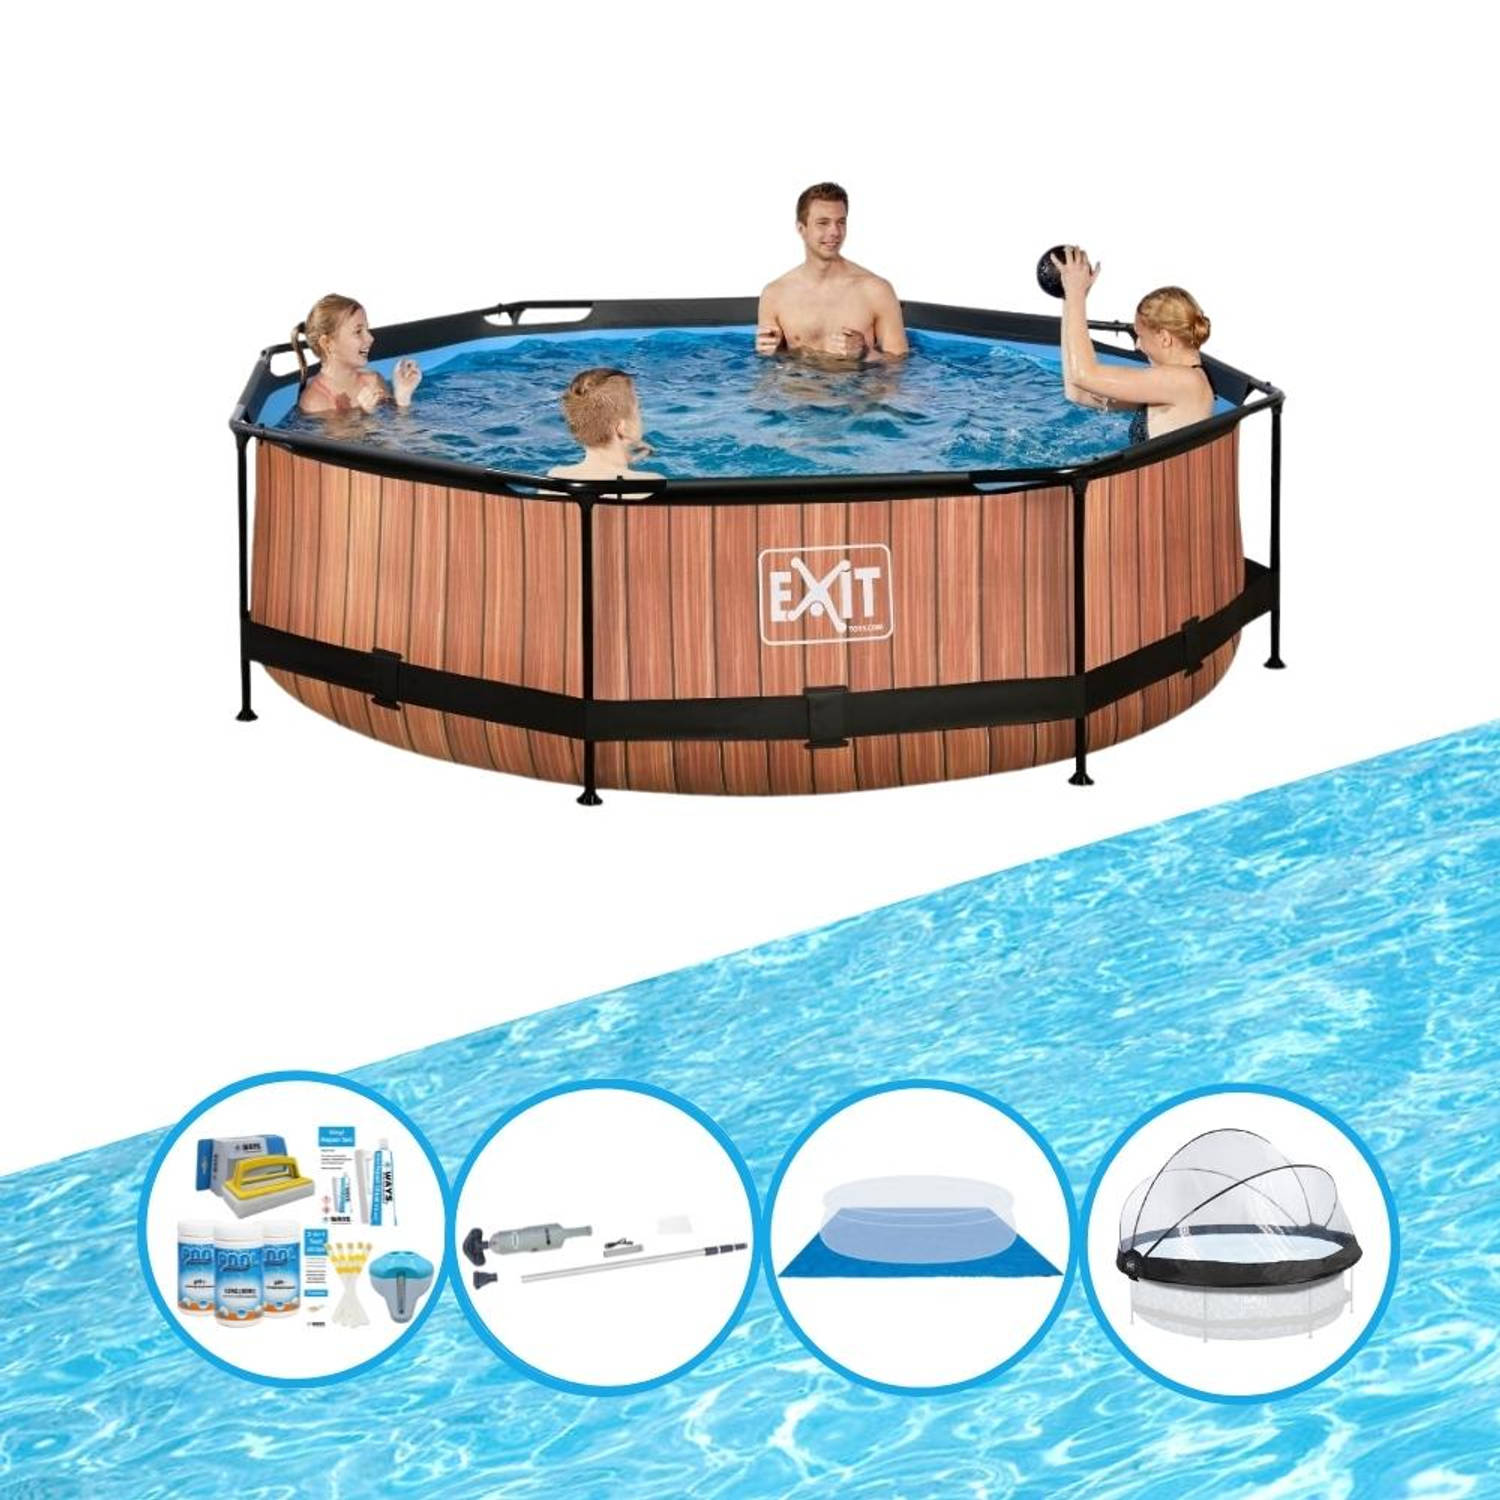 EXIT Toys Exit Zwembad Timber Style - ø300x76 Cm - Frame Pool - Complete Zwembadset - Bruin